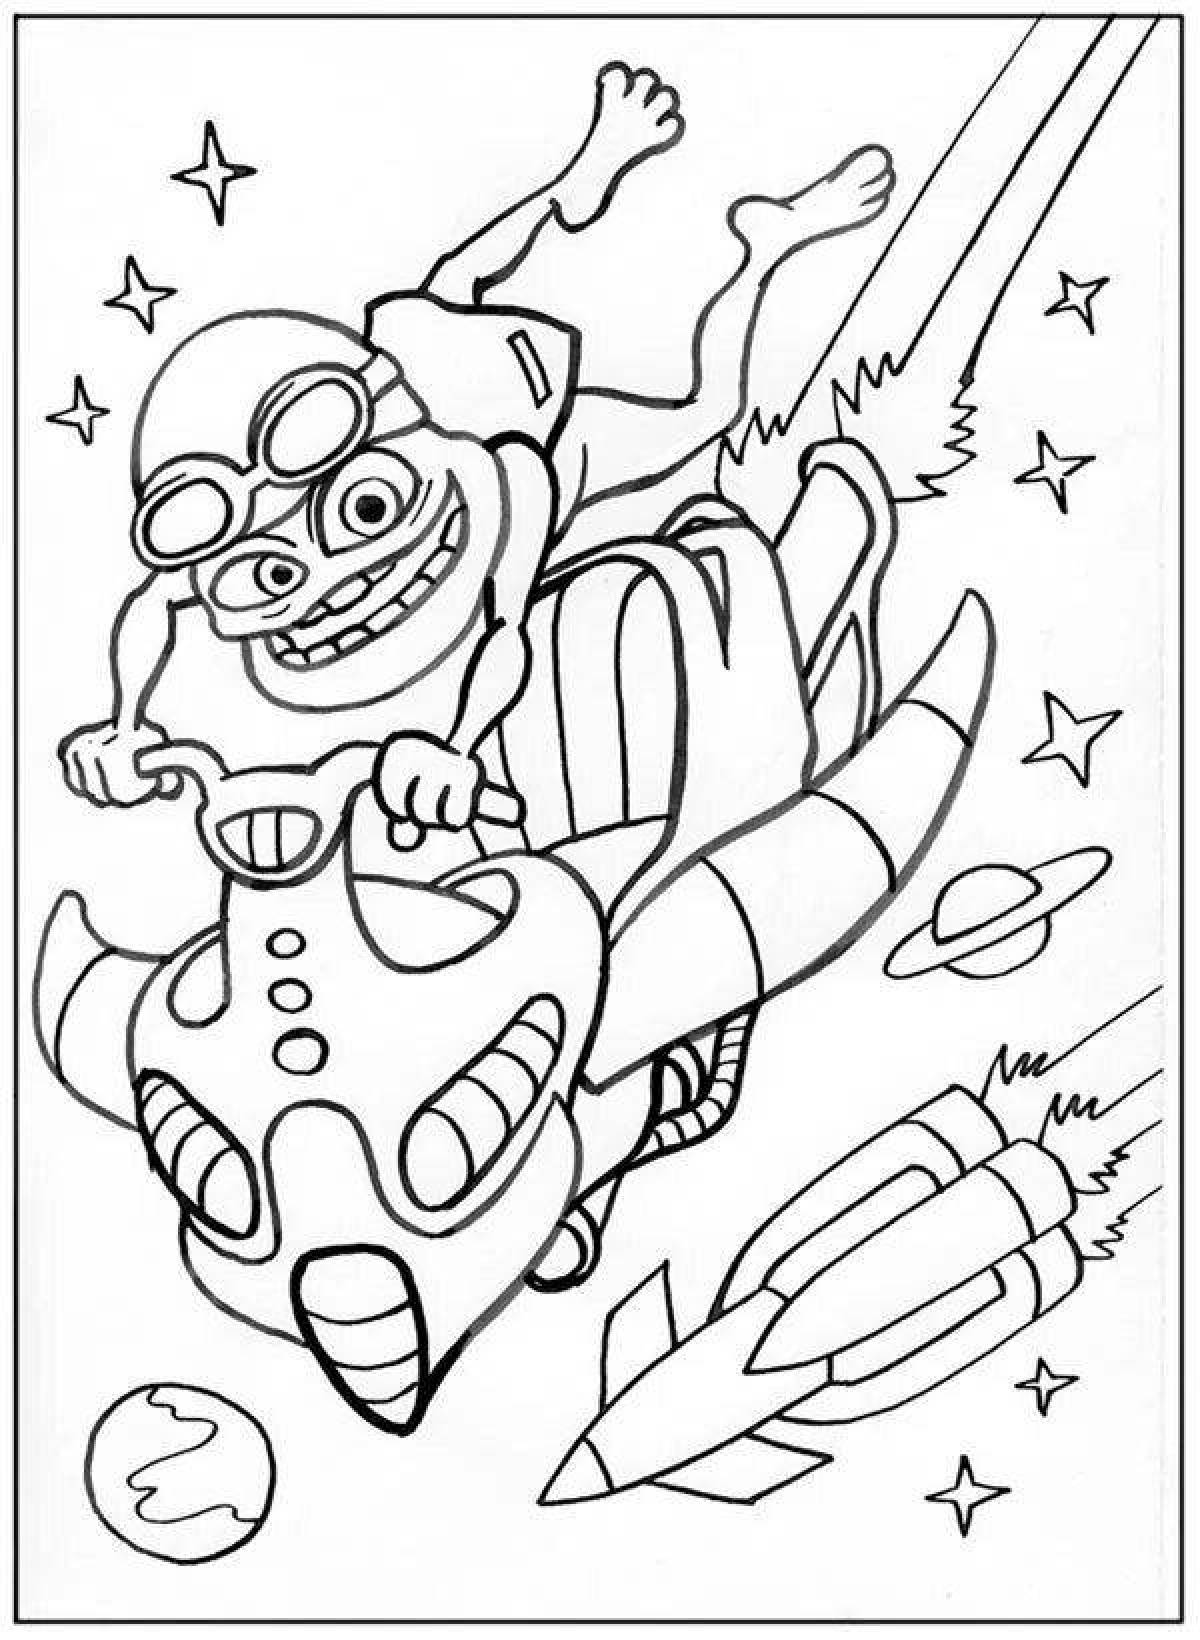 Nice crazy frog coloring book